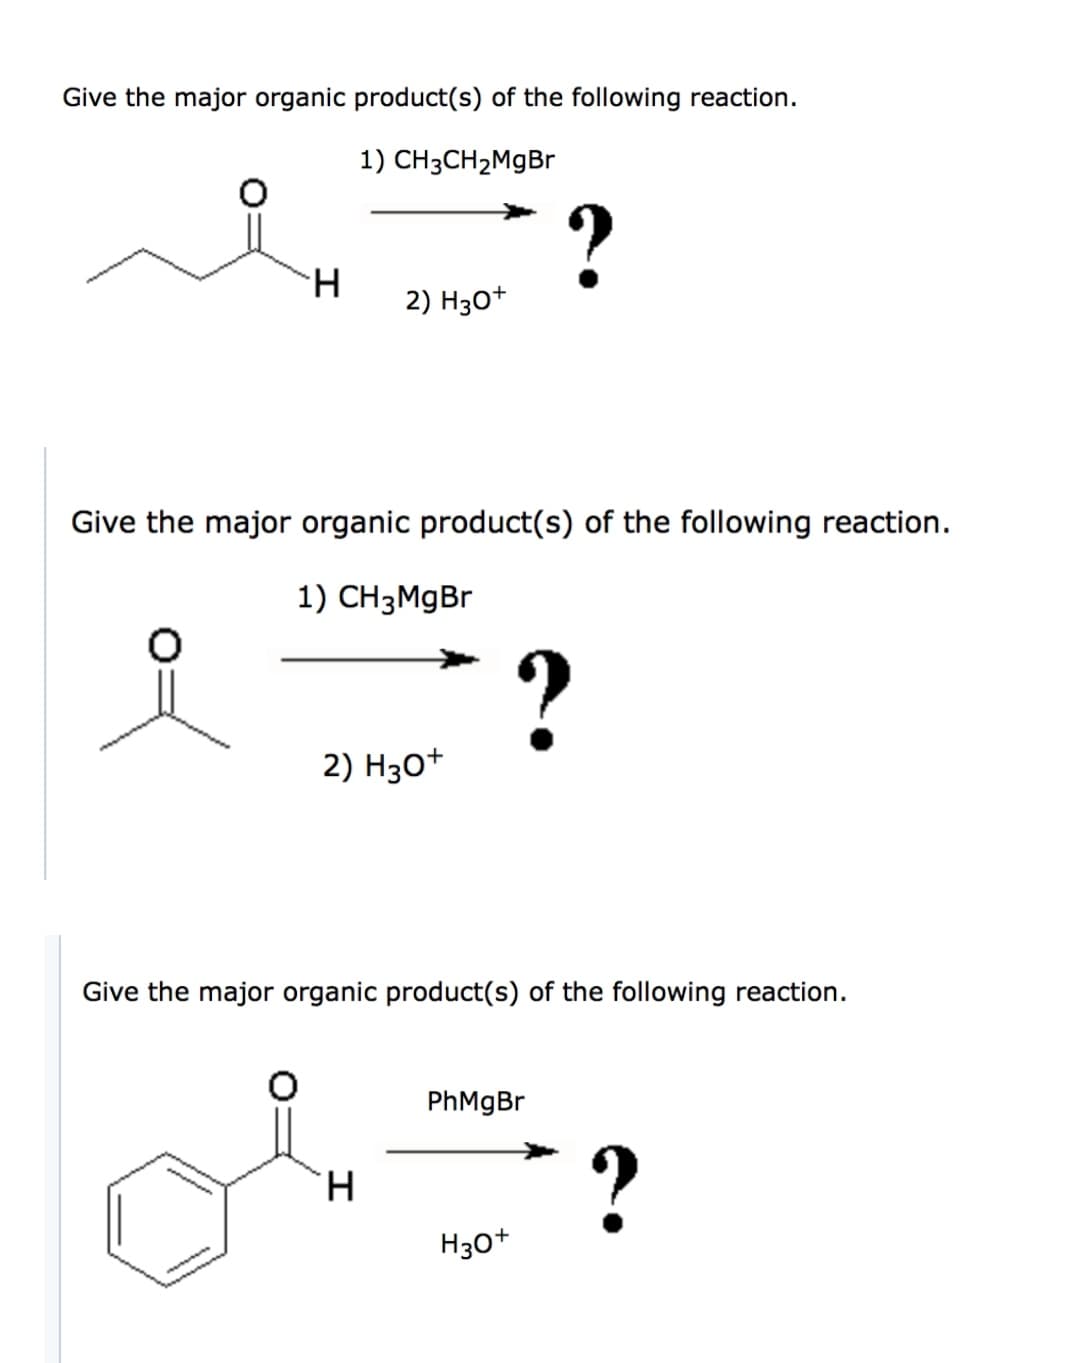 Give the major organic product(s) of the following reaction.
1) СНзCH2MgBr
2) H30+
Give the major organic product(s) of the following reaction.
1) CHзМgBr
2) H3O+
Give the major organic product(s) of the following reaction.
PhMgBr
?
H.
H30+
